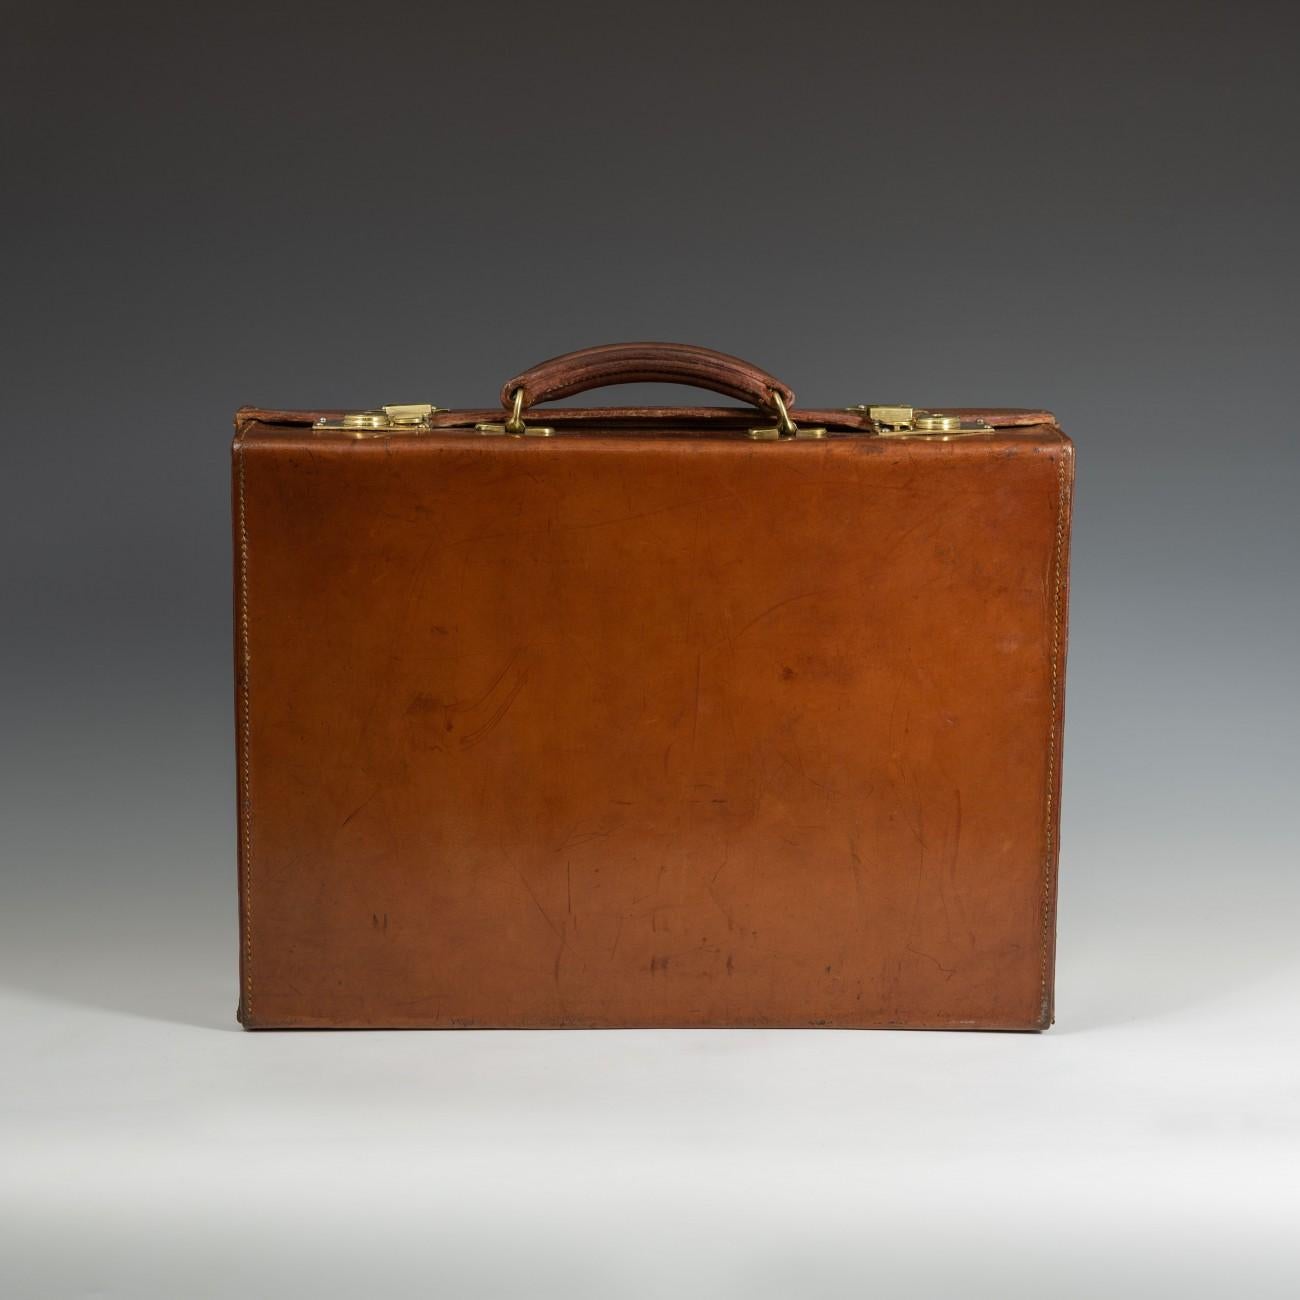 A splendid English leather attaché case with cast brass fittings, circa 1940. The briefcase has a new fabric lining to the interior.

Dimensions: 45.5 cm/17? inches x 34 cm/13? inches x 12.5 cm/4? inches

Bentleys are Members of LAPADA, the London